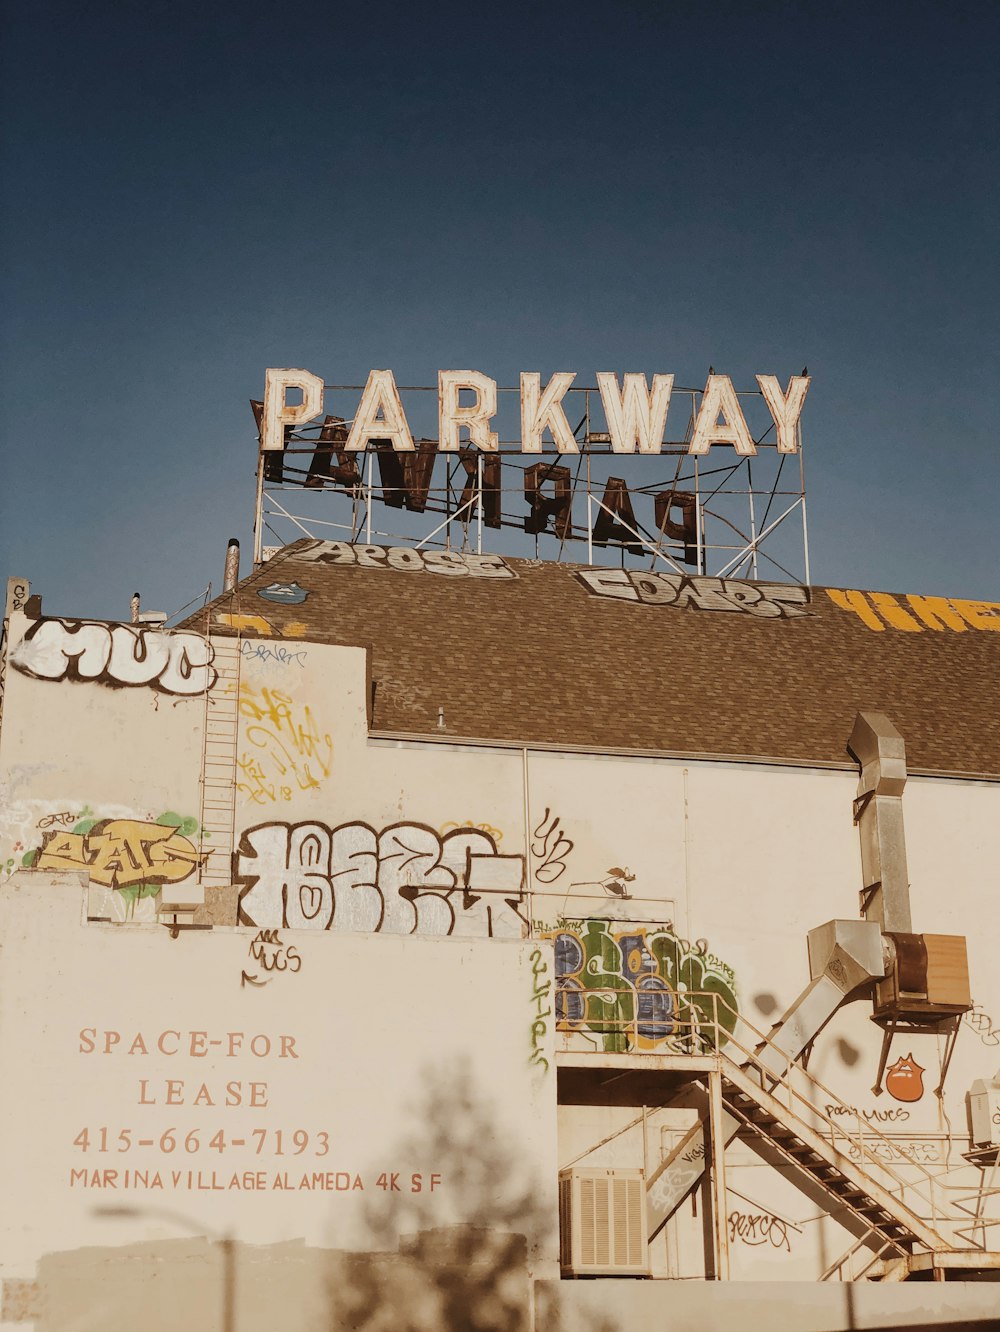 Parkway signage